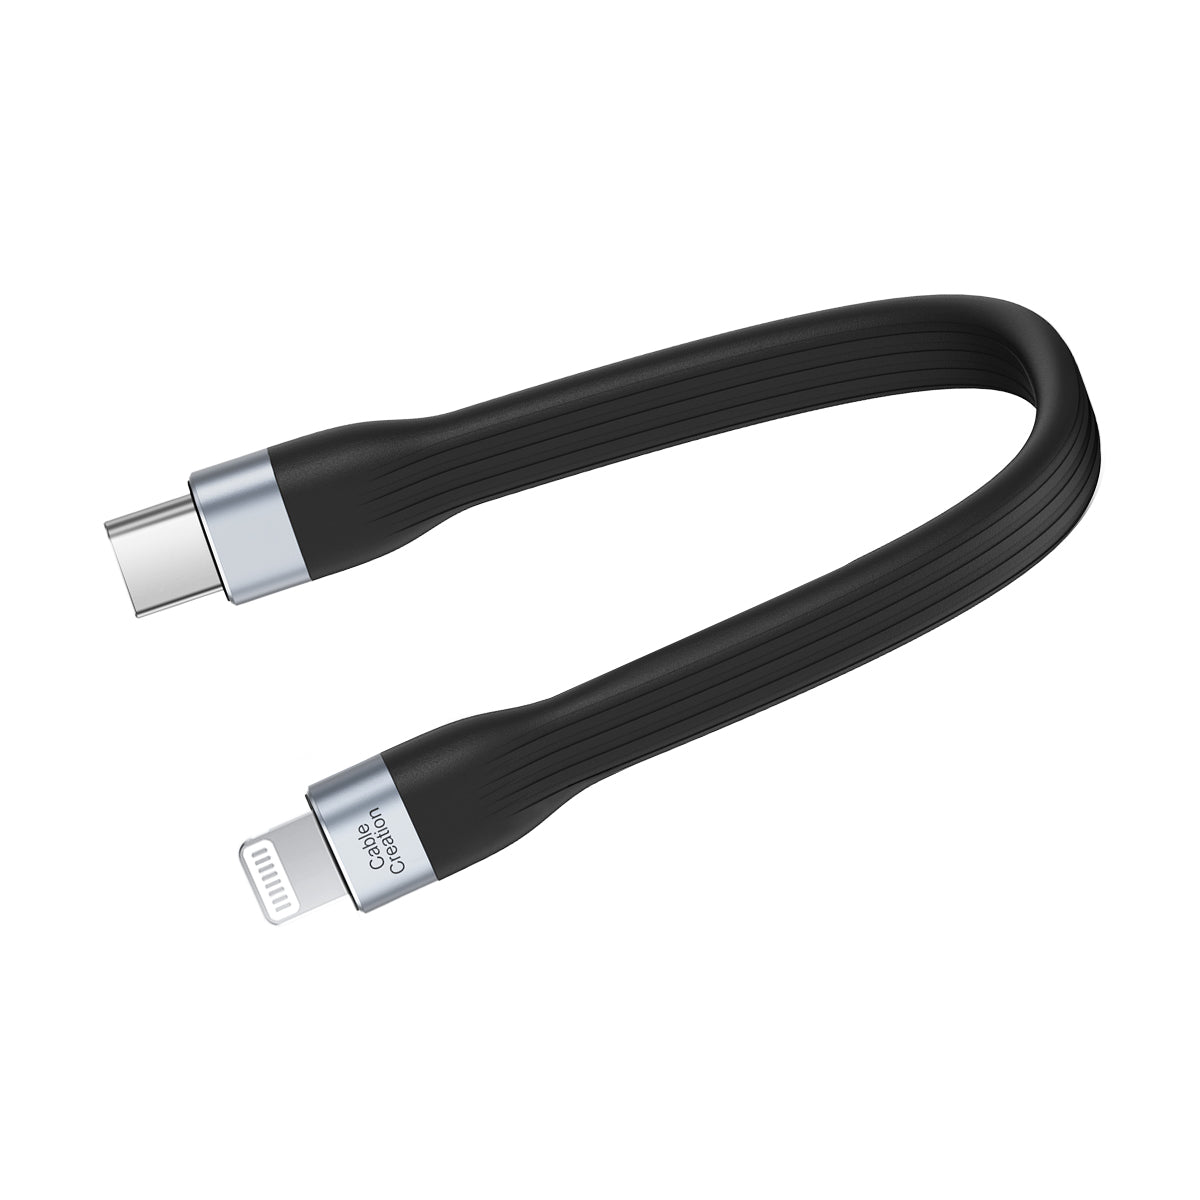 Ik wil niet Hoogte semester Short Lightning USB C Charger Cable | CableCreation